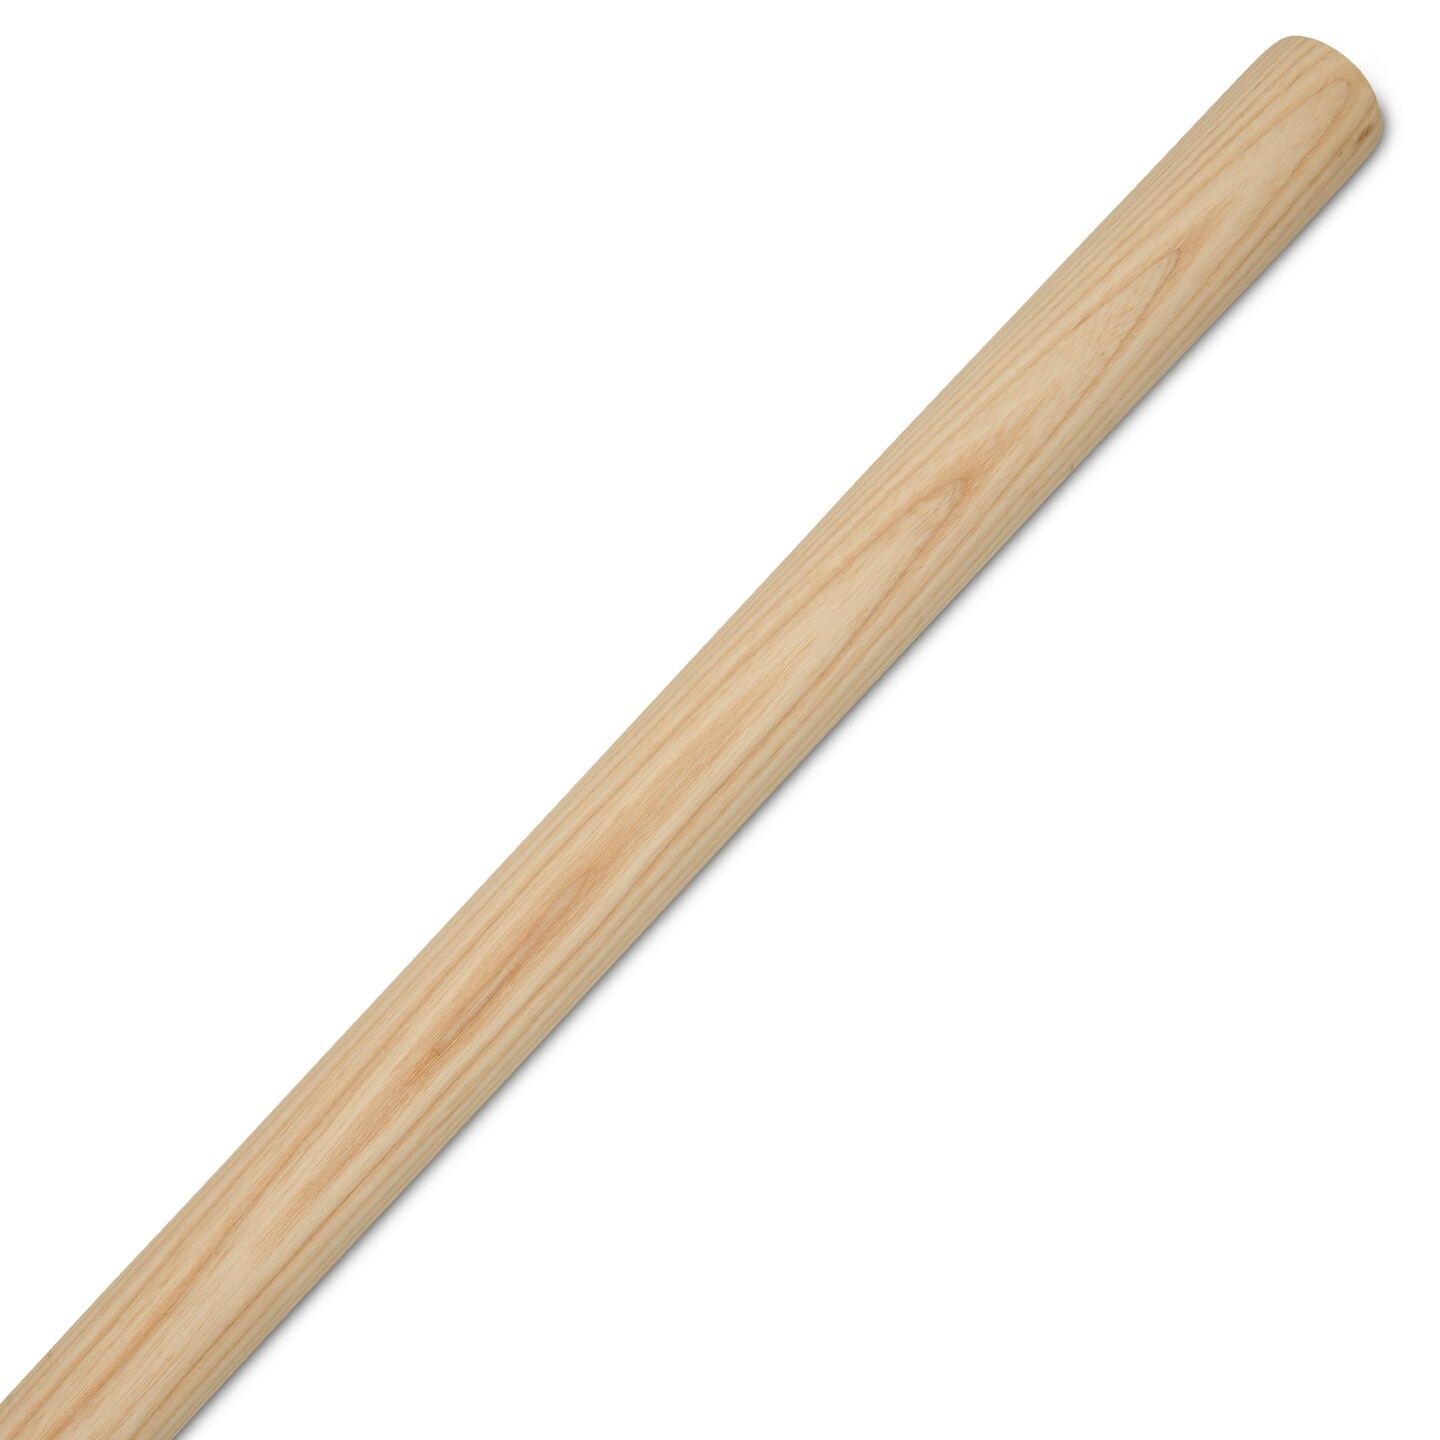 Wooden Dowel Rods 1-3/4 inch Thick, Multiple Lengths Available, Unfinished  Sticks Crafts & DIY, Woodpeckers